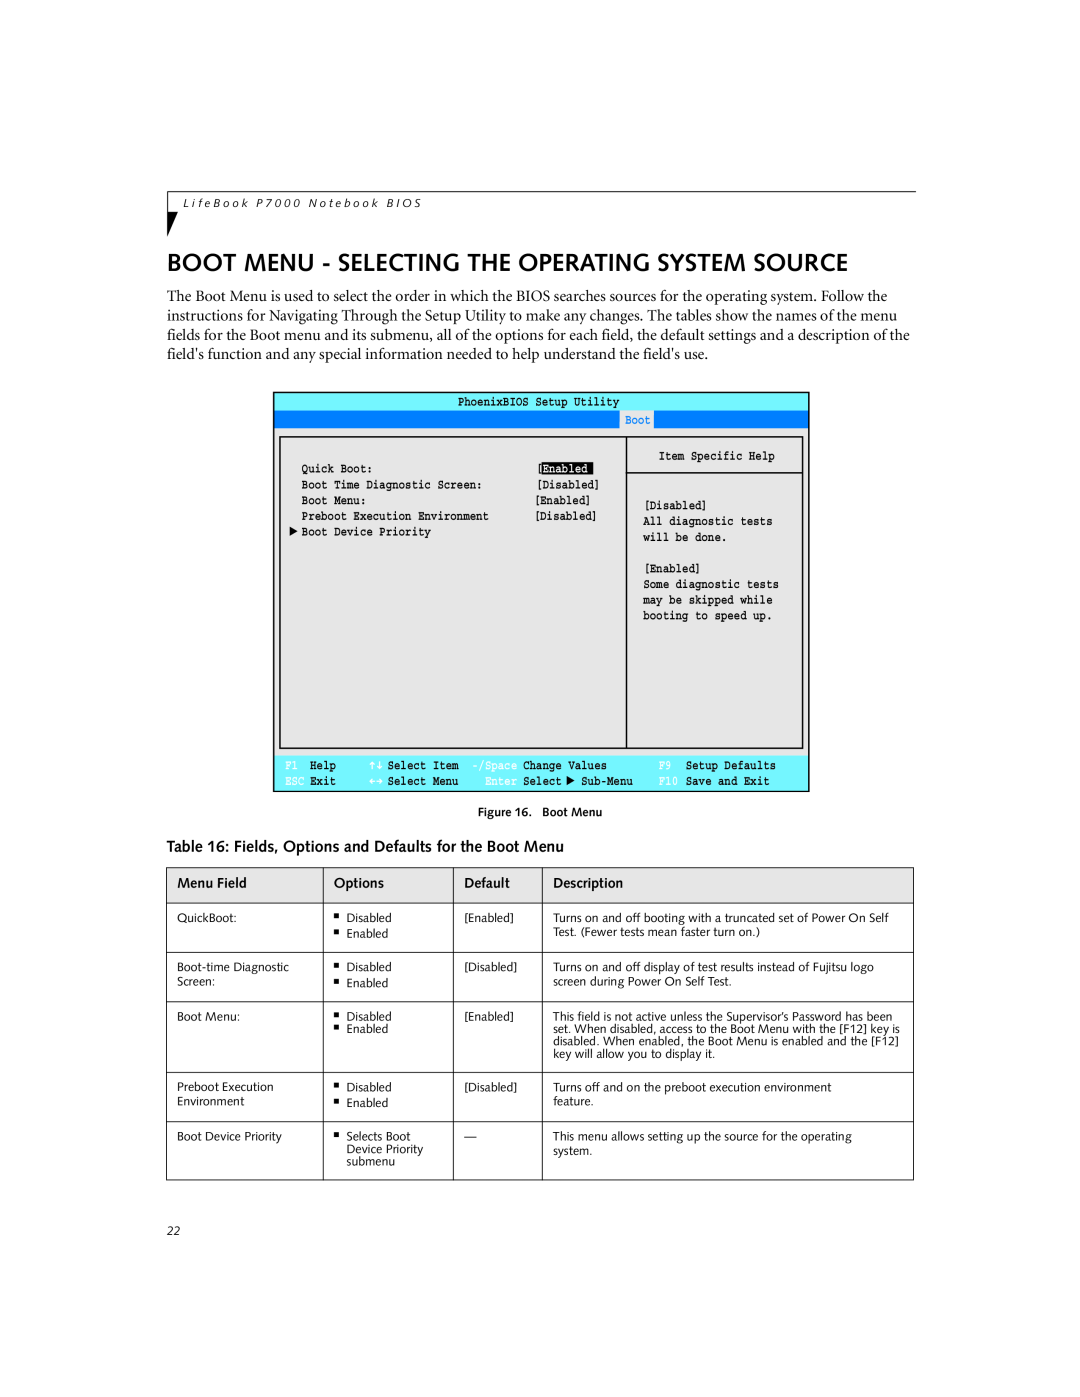 Fujitsu P7120D Boot Menu - Selecting The Operating System Source, Fields, Options and Defaults for the Boot Menu, Main 